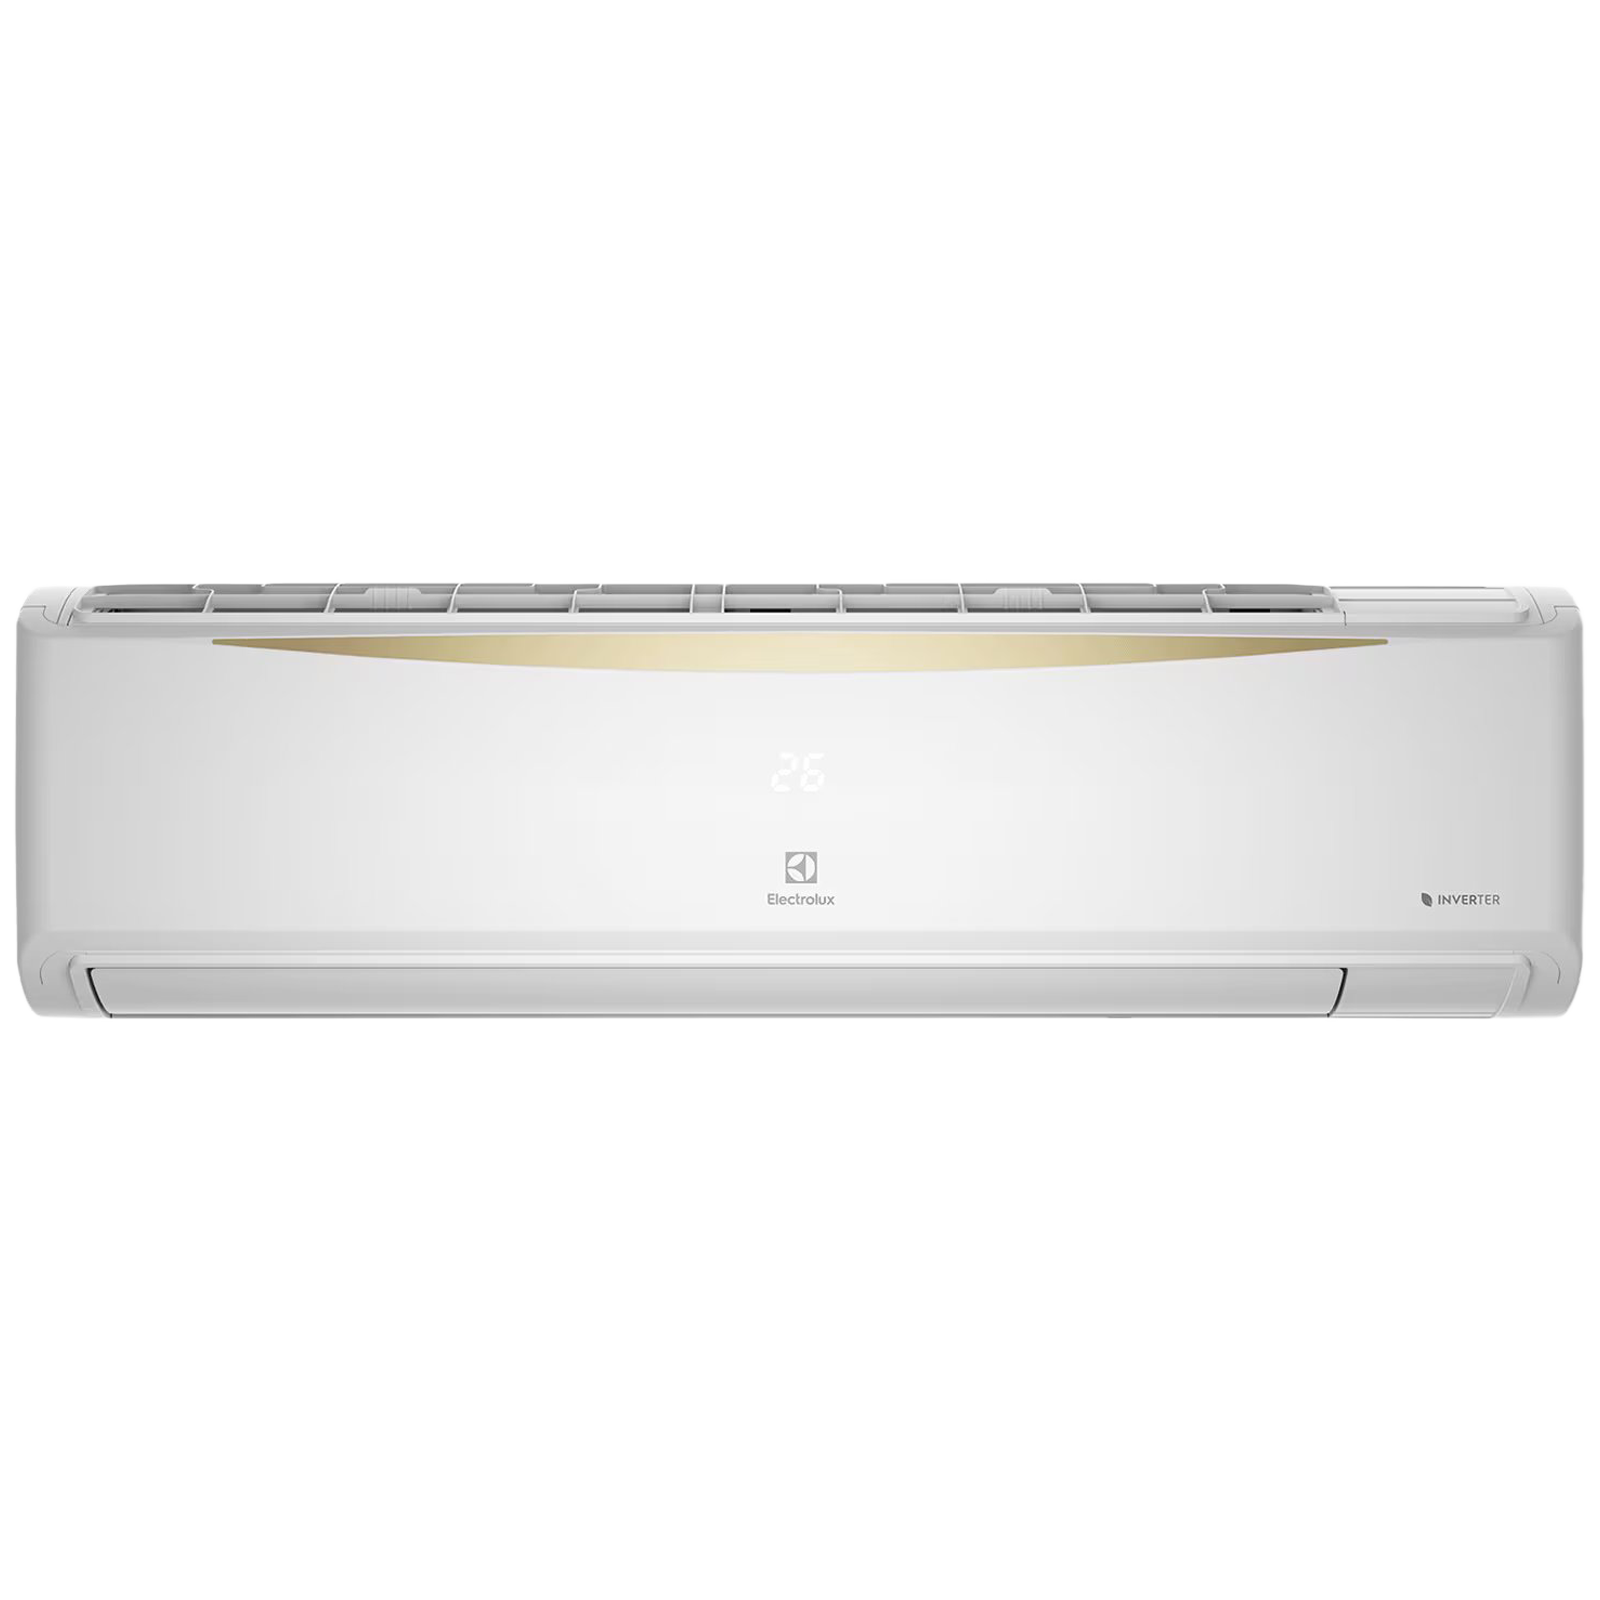 Electrolux UltimateHome 500 Convertible 1.5 Ton 5 Star Inverter Split AC with 360 Degree Cooling (2022 Model, Copper Condenser, ESV185C3NA)